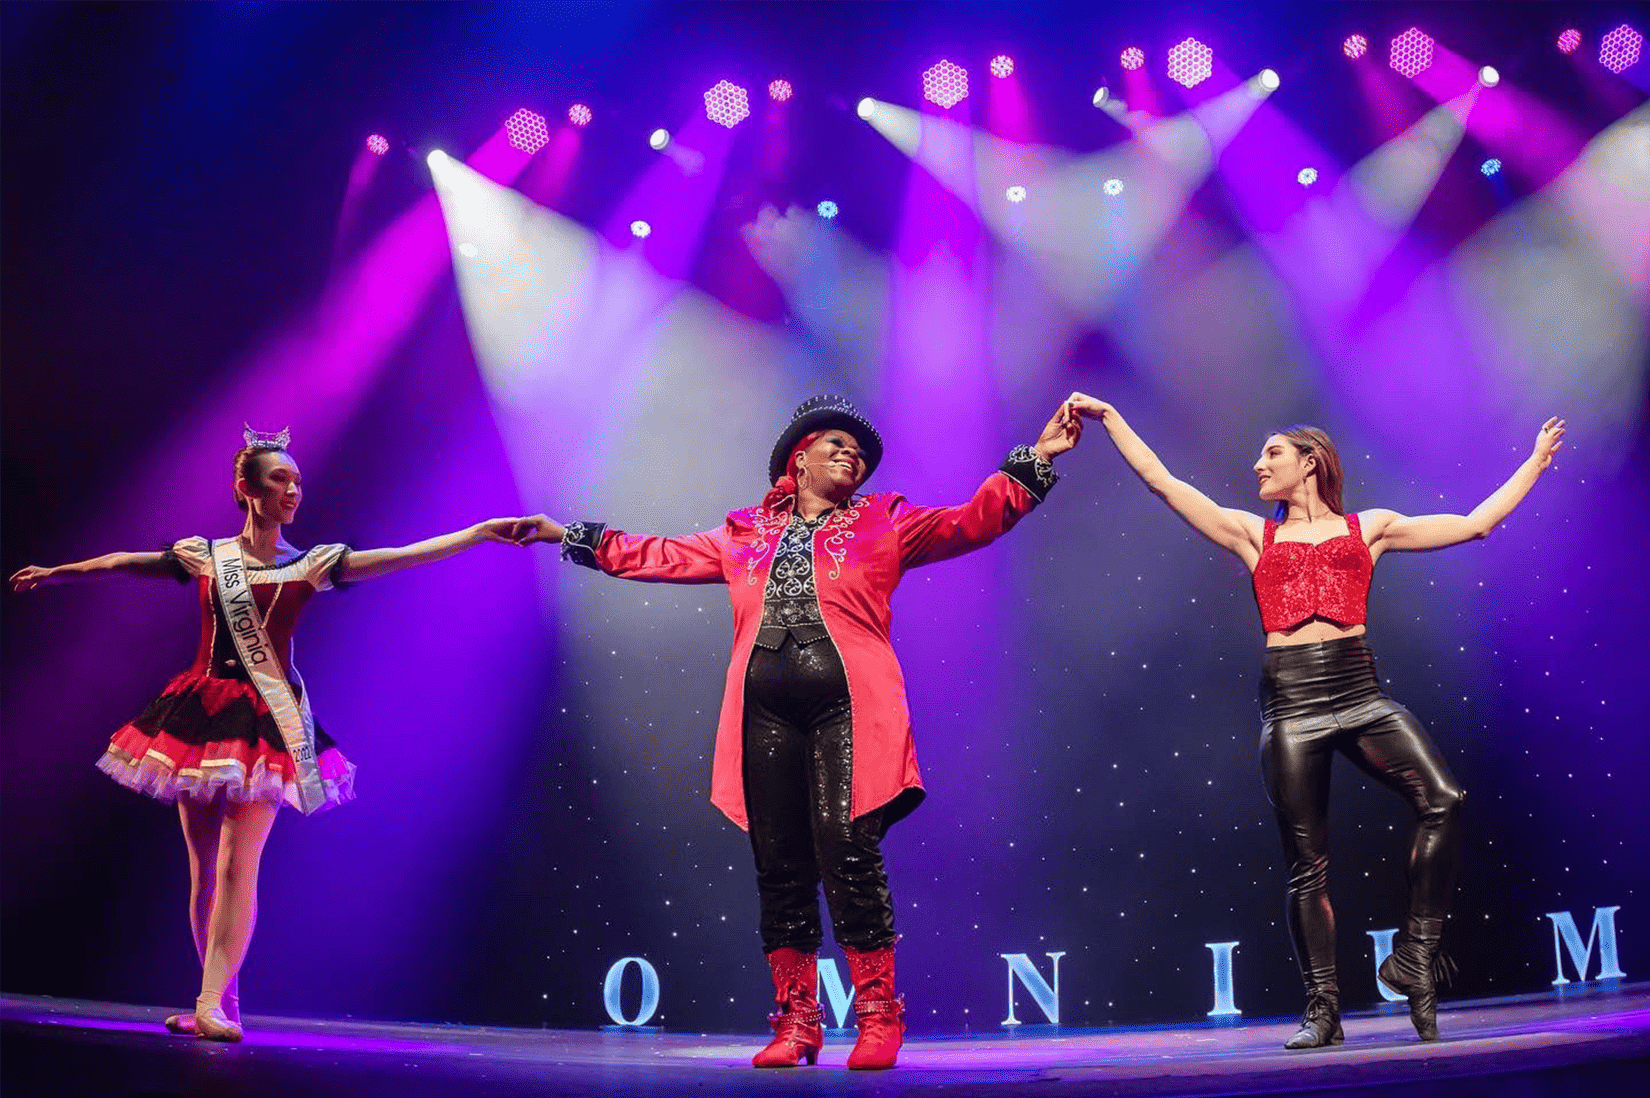 A ringmaster and two women on either side her prepare to take a bow.